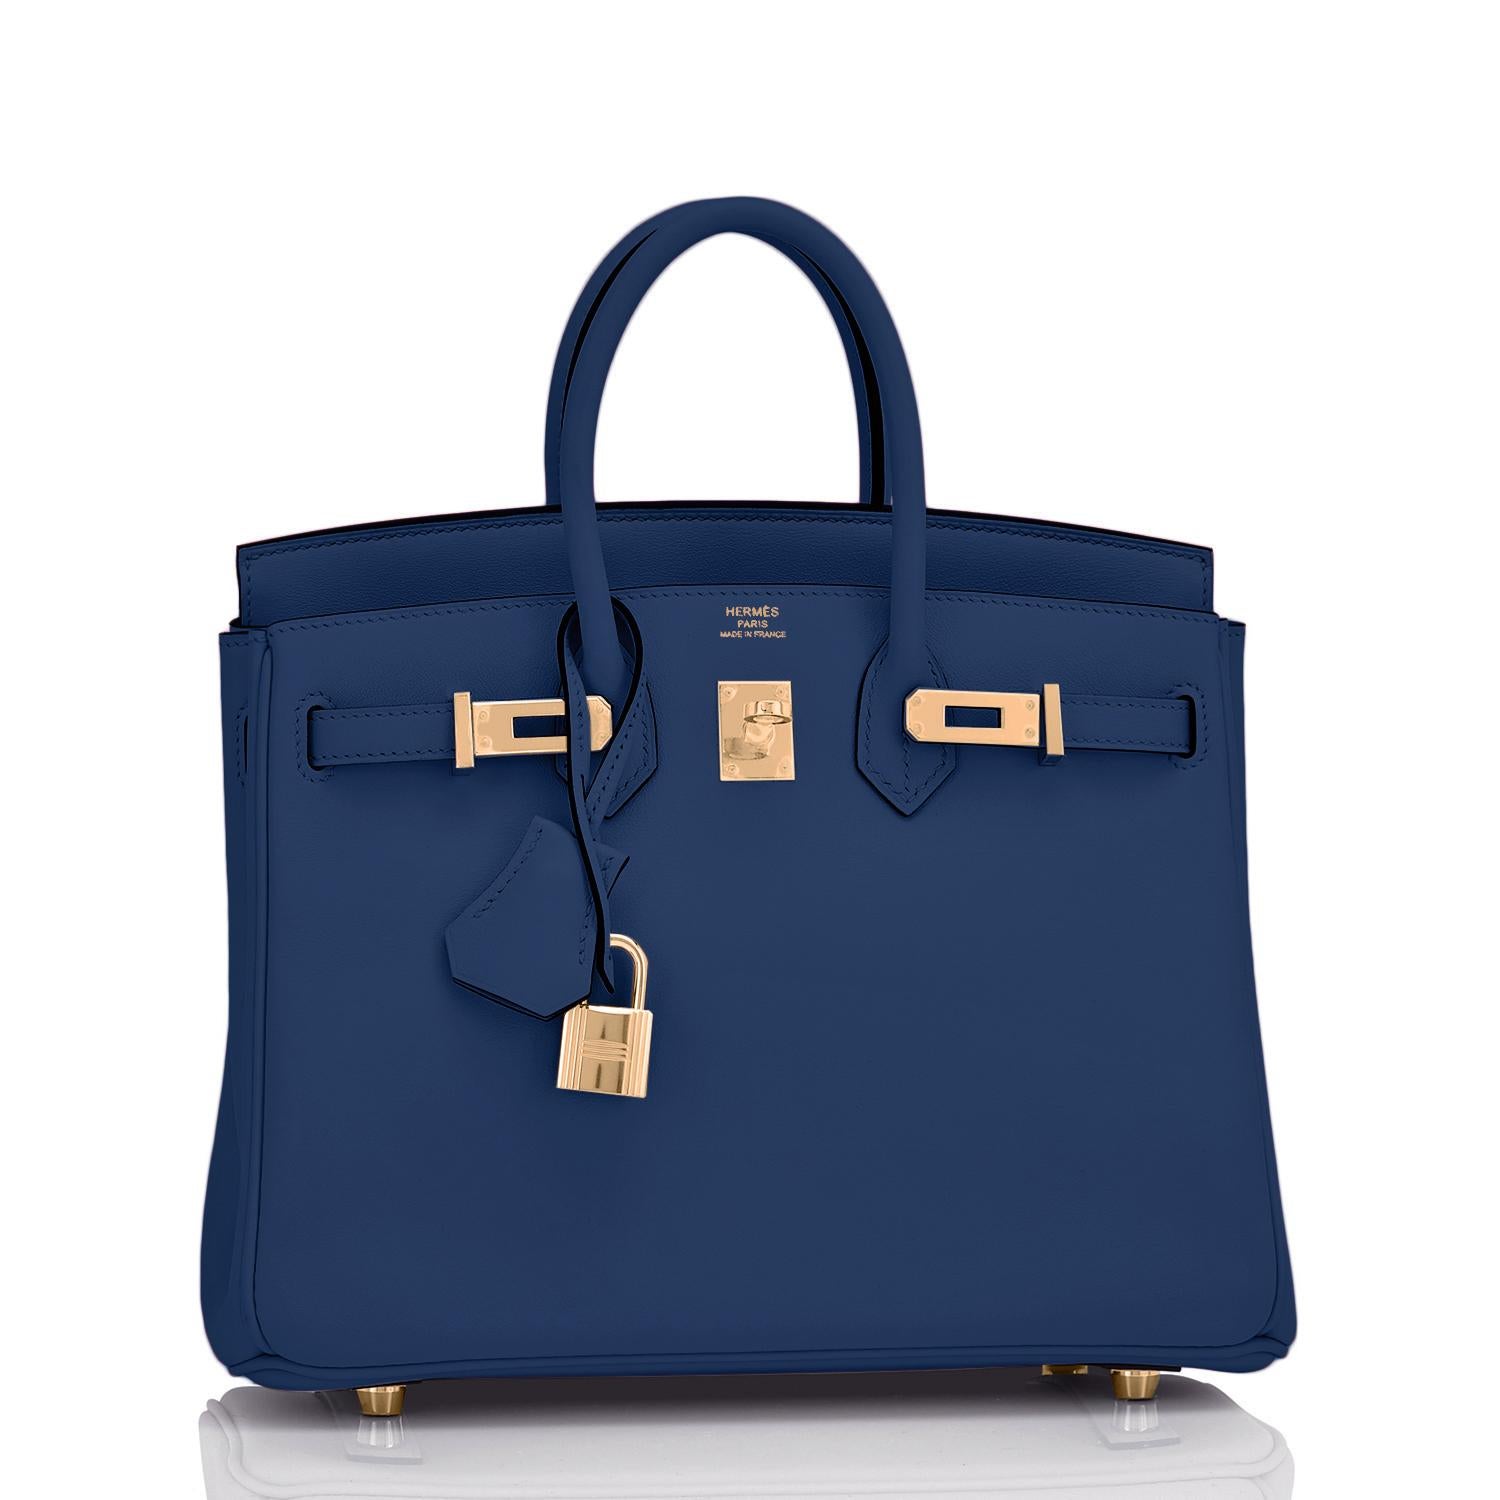 Hermes Birkin 25 Navy Blue Bag Gold Hardware Z Stamp, 2021
Navy is the perfect neutral Baby Birkin for spring summer and all year round!
Brand New in Box. Store Fresh. Pristine Condition (with plastic on hardware) 
Just purchased from Hermes store;